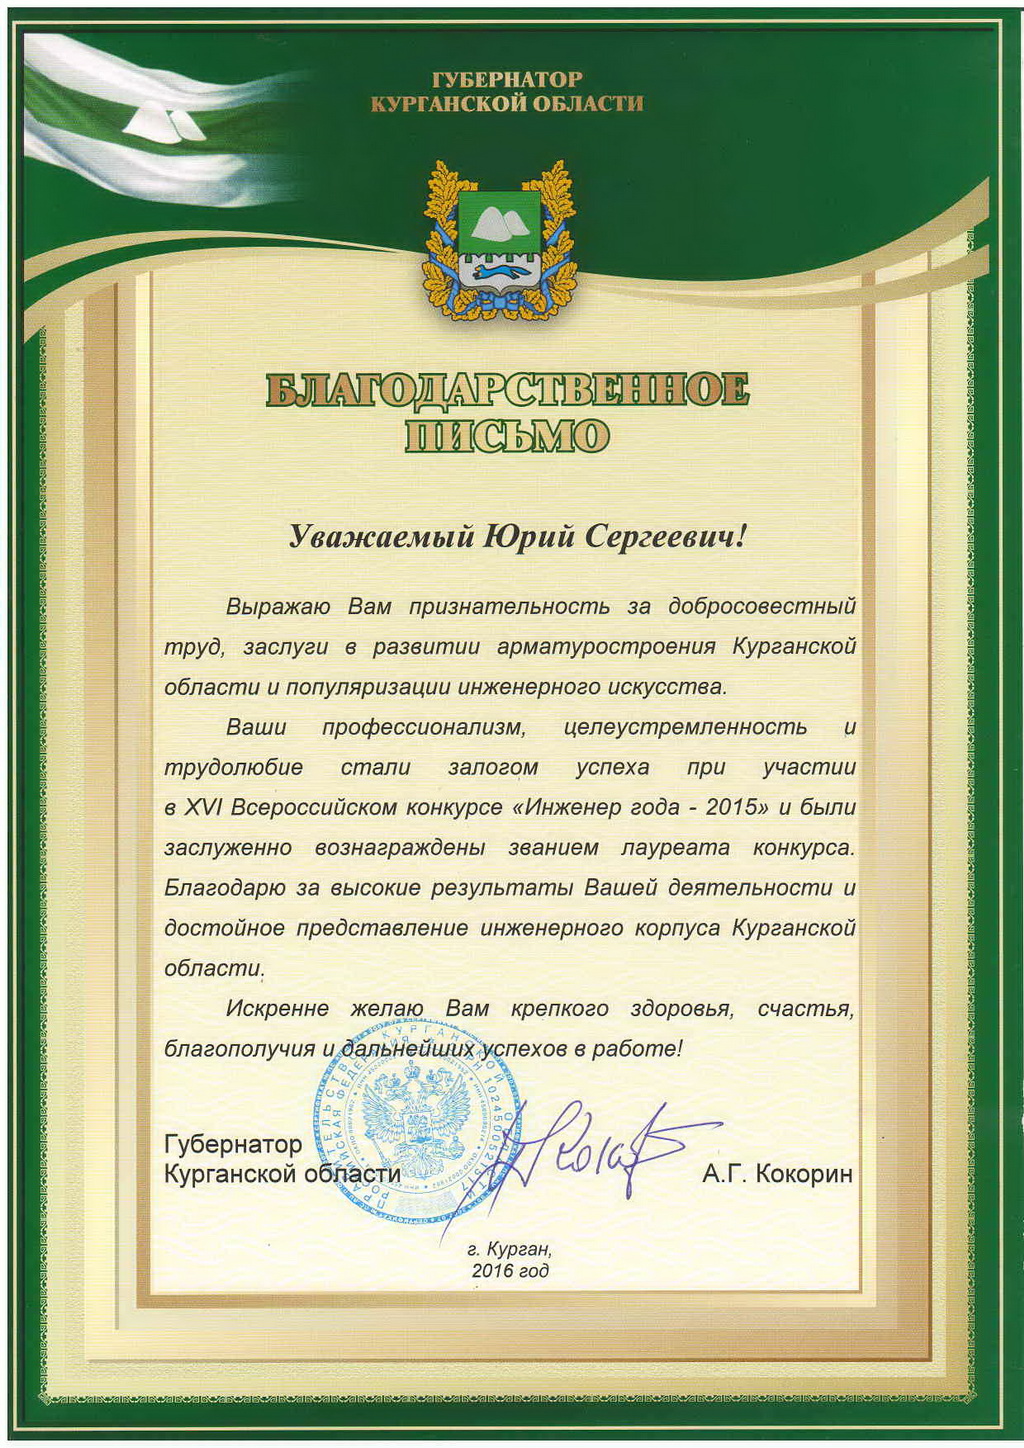 Letter of thanks from the Governor of the Kurgan region